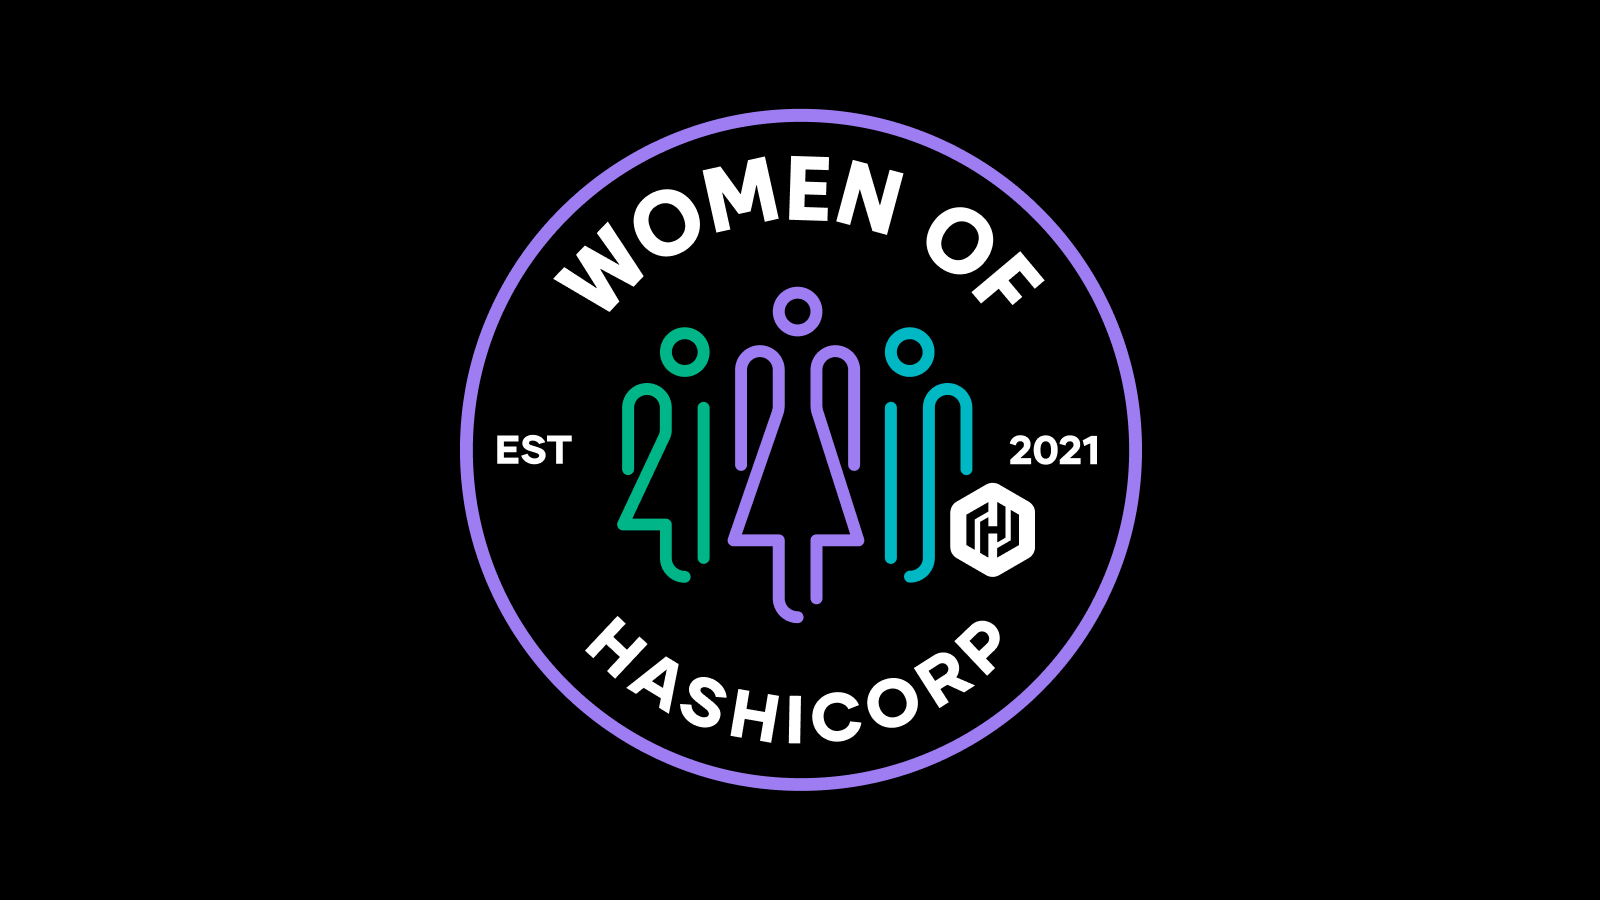 International Women's Day: HashiCorp Leaders Share Their Stories